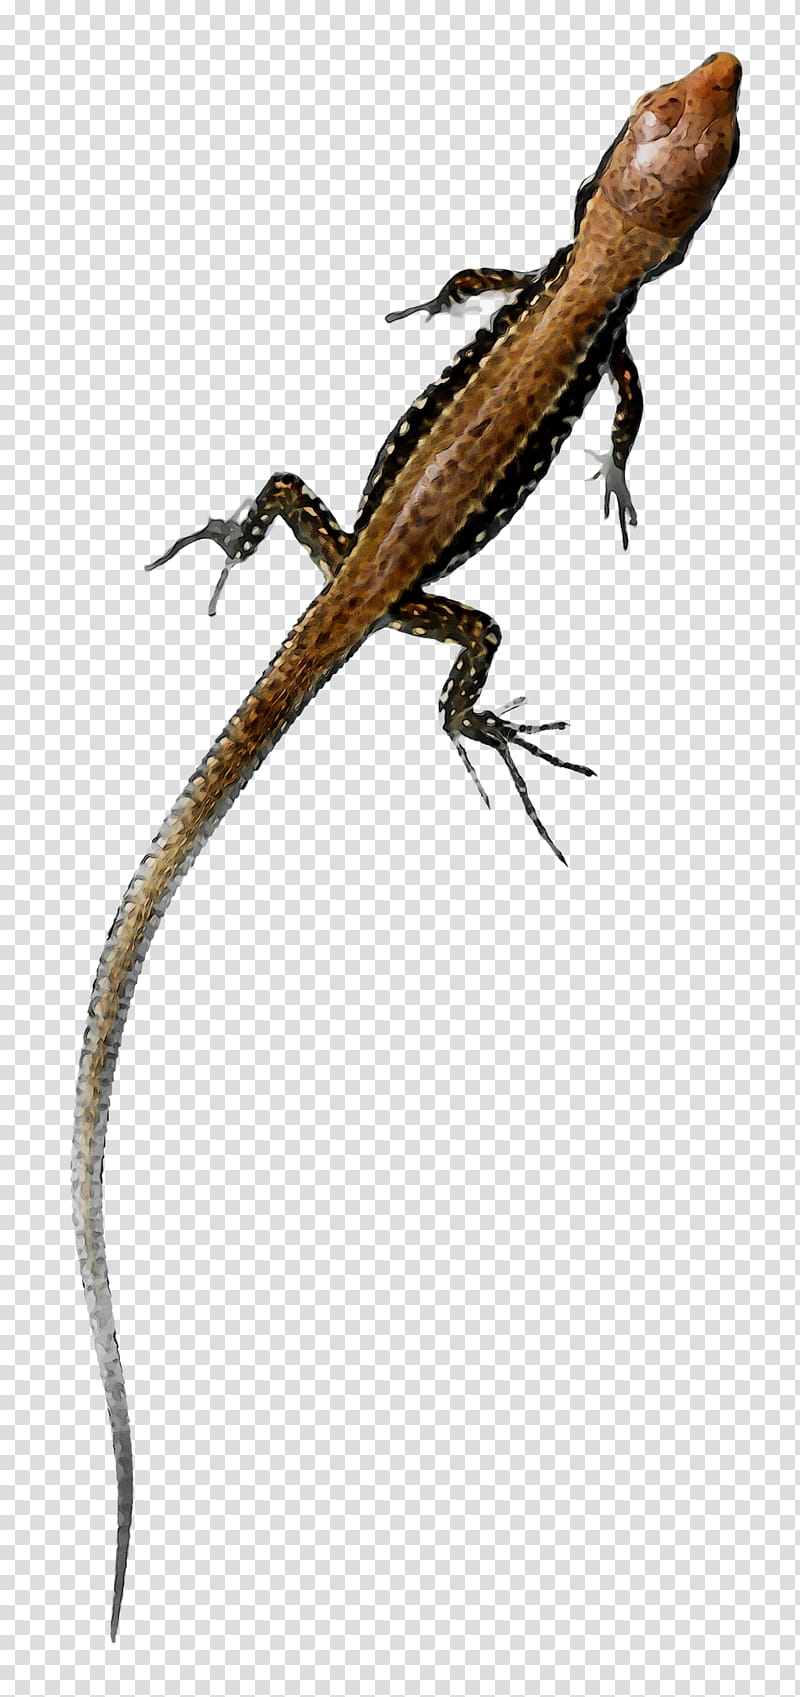 Fence, Agamas, Anoles, Gecko, Lacertids, Animal, Agamid Lizards, Reptile transparent background PNG clipart